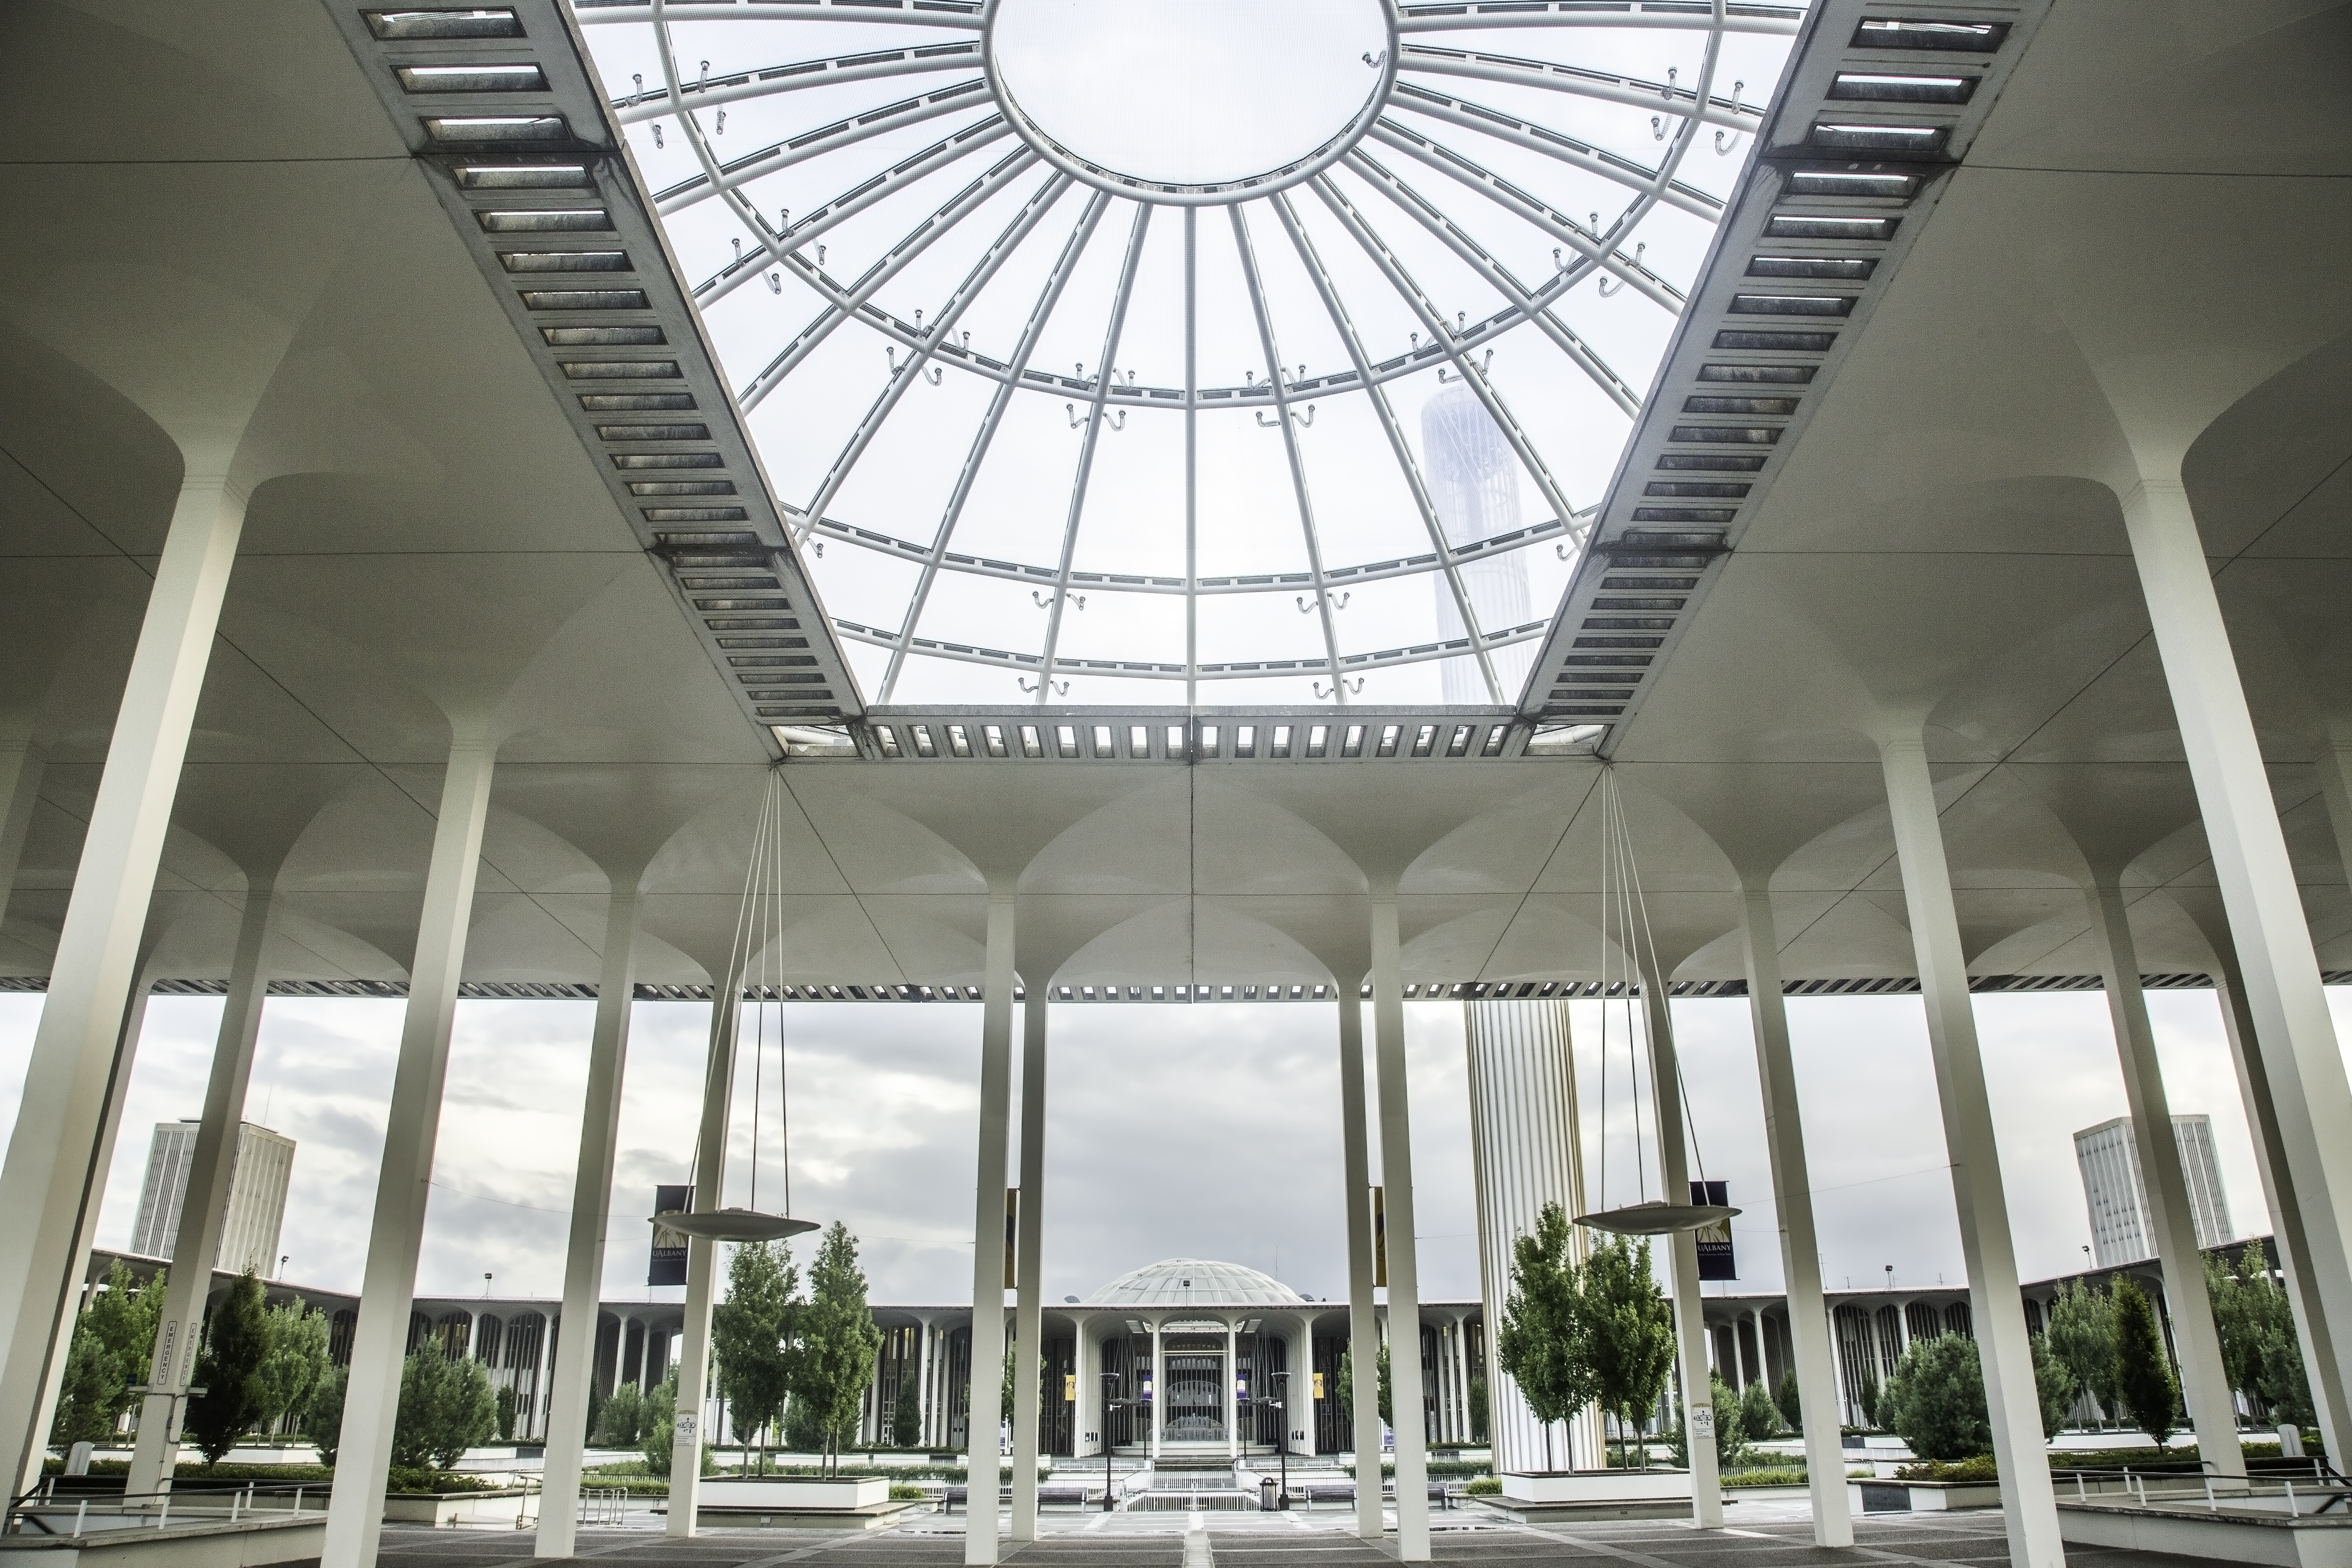 UAlbany's main campus shot with tall columns holding up a windowed roofing structure. The campus fountain can be seen in the background. It is a cloudy but beautiful day on campus.